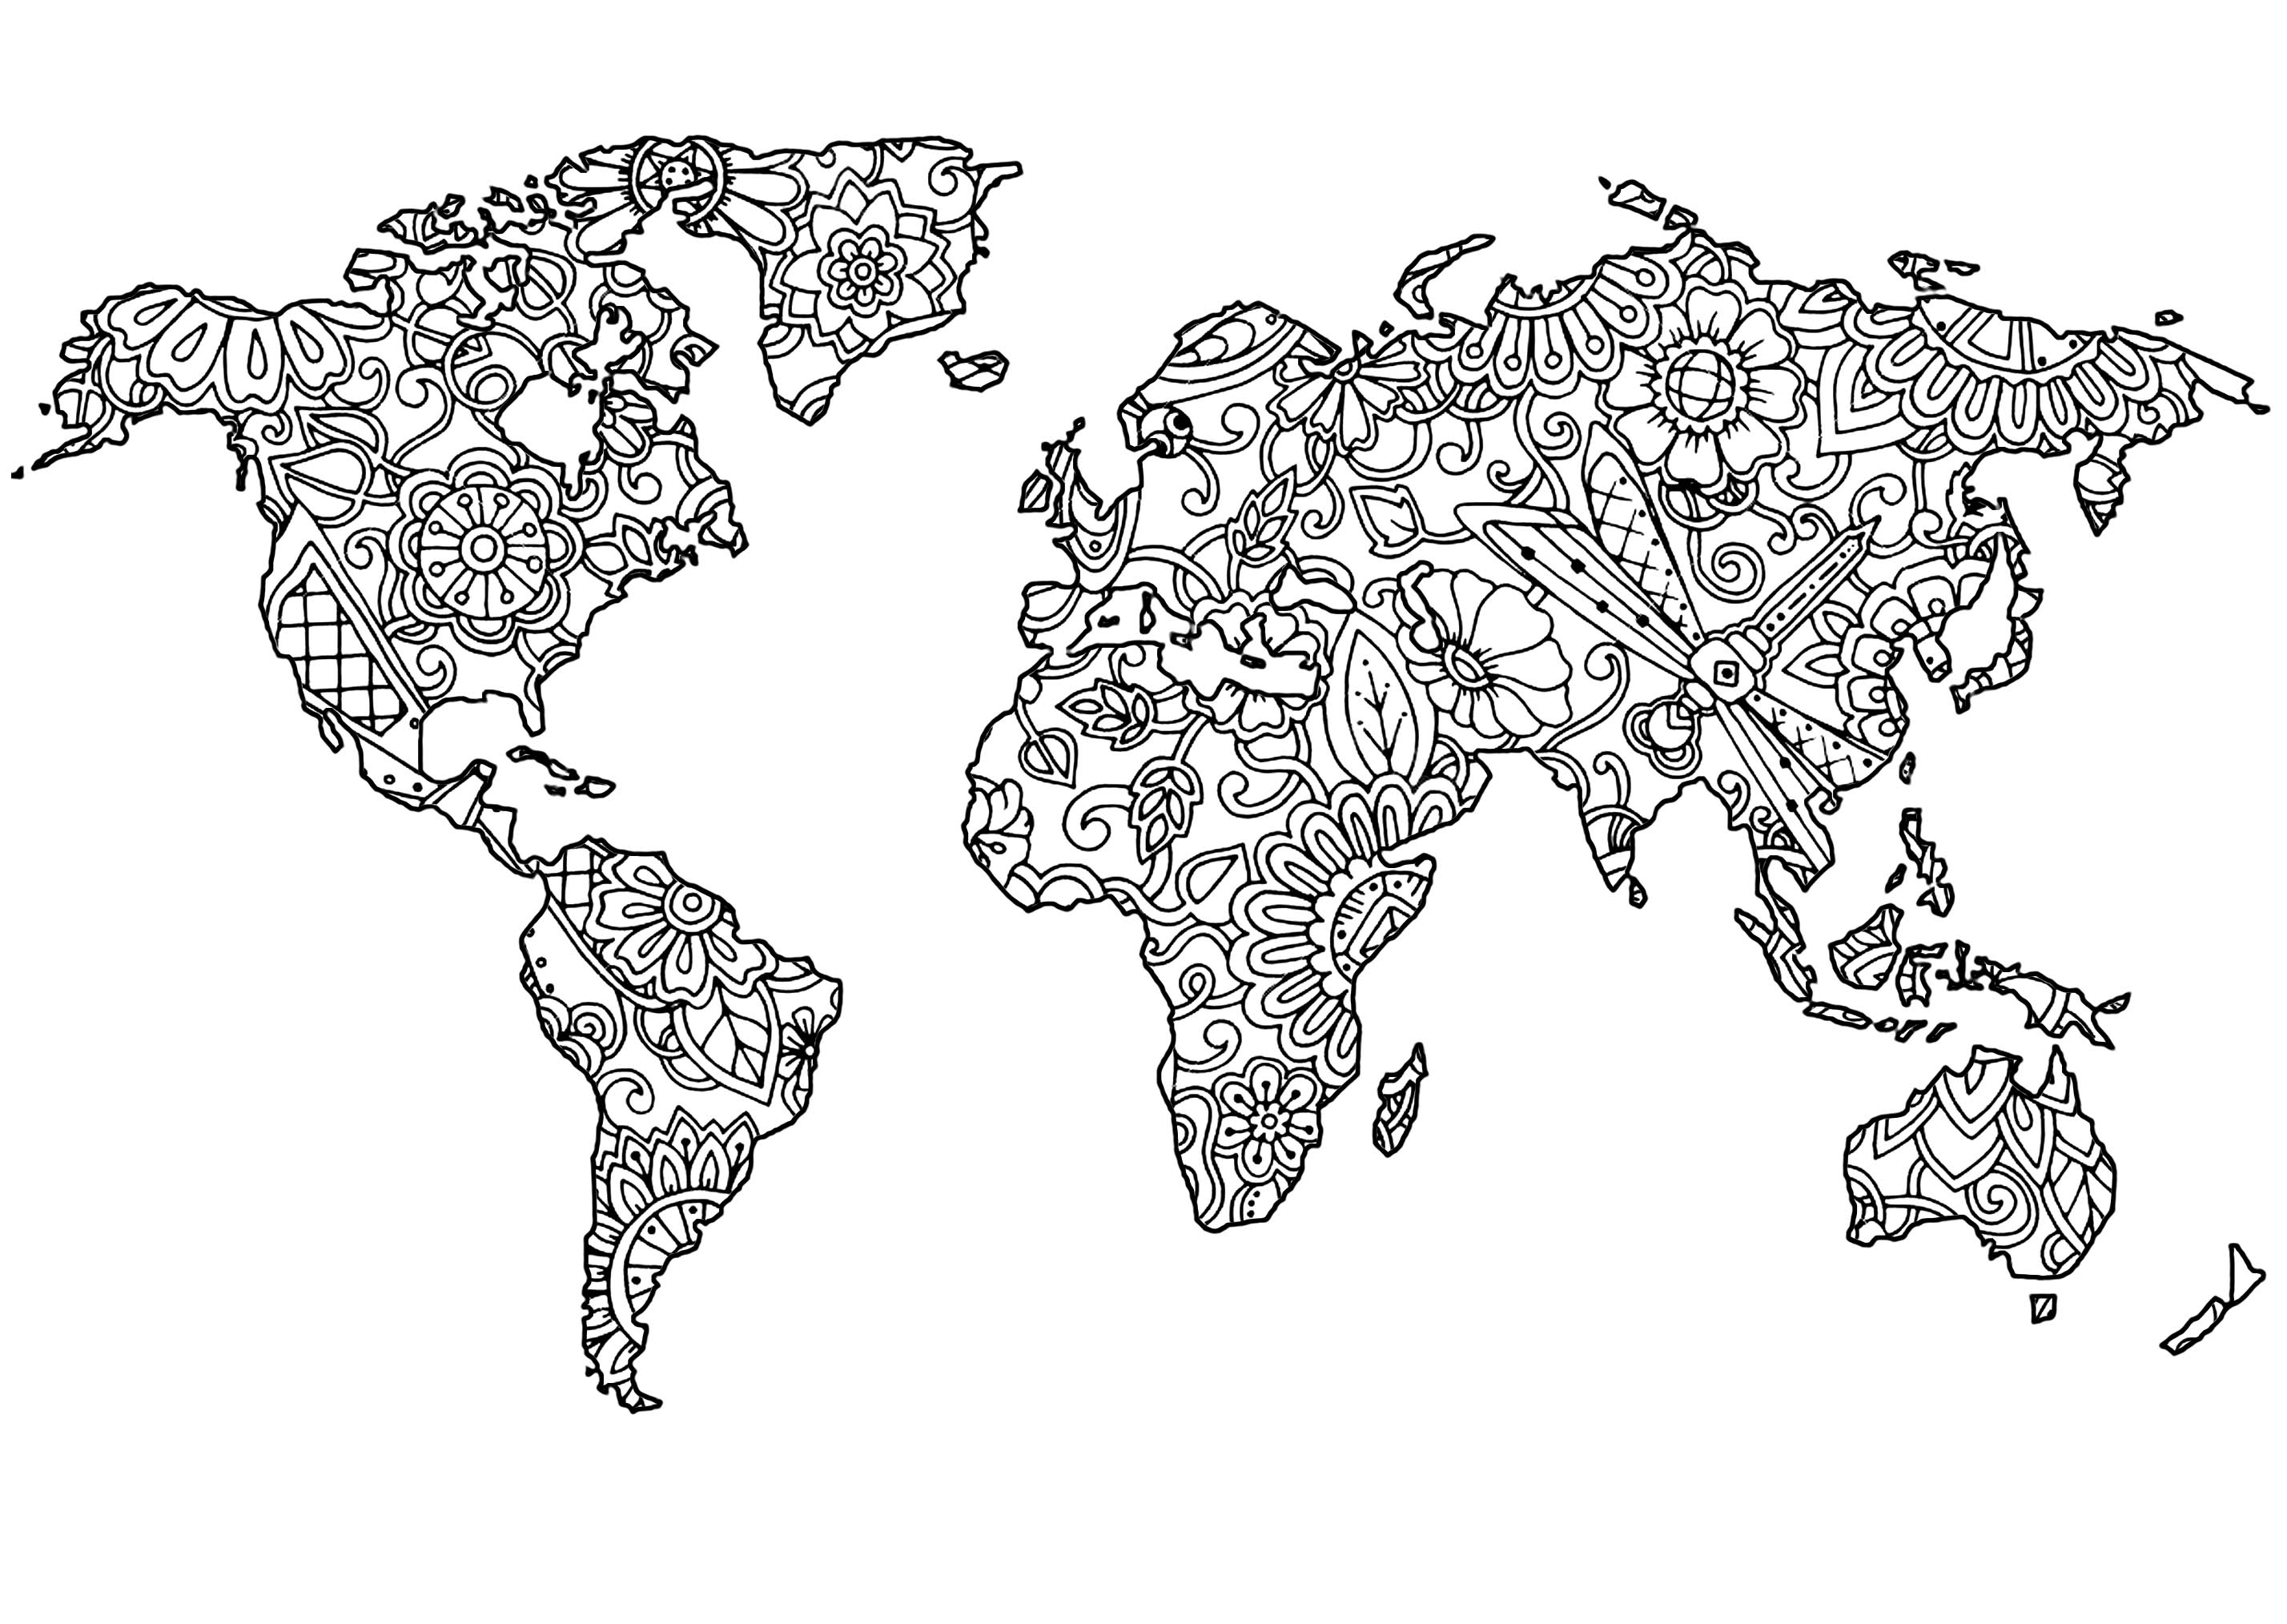 Planet Earth and Flowered patterns in its continents, Artist : Art. Isabelle